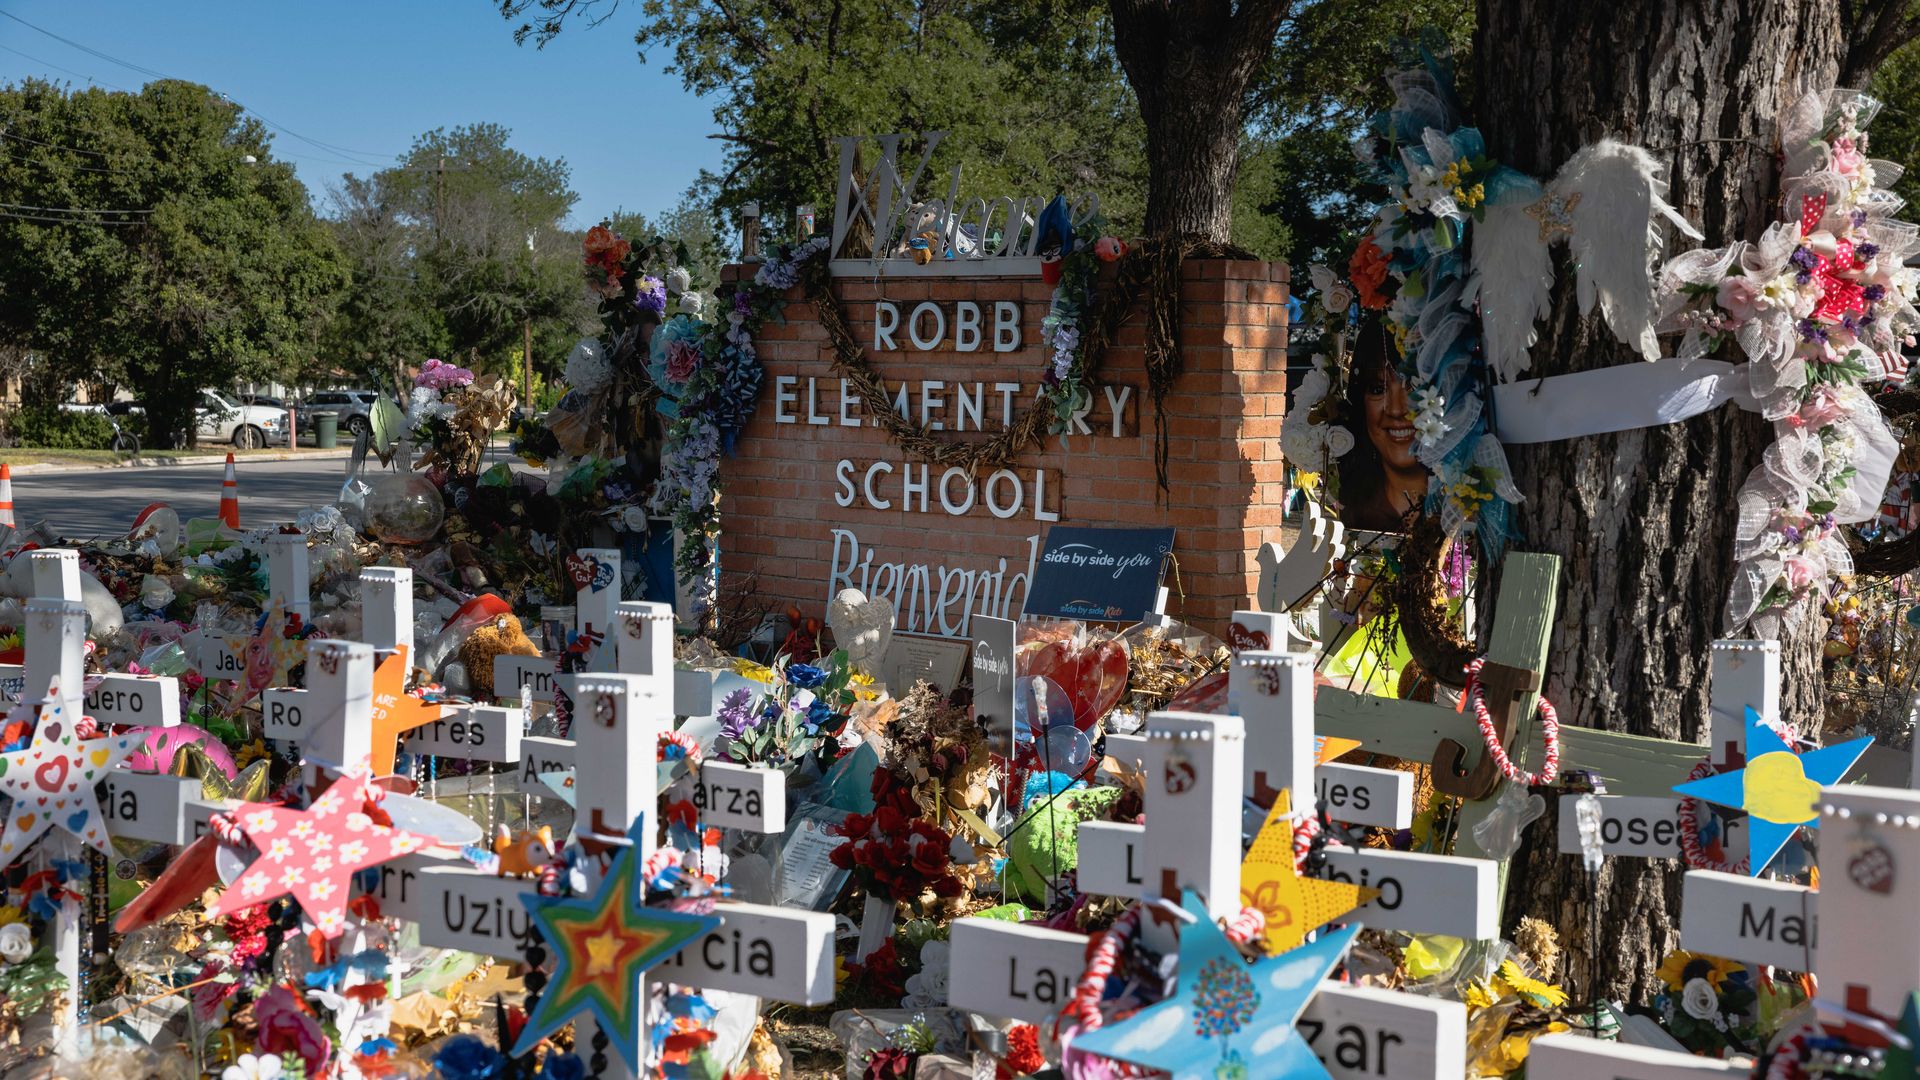 Photo of a memorial site with crosses, flowers and pictures surrounding a brick sign that says "Robb Elementary School"